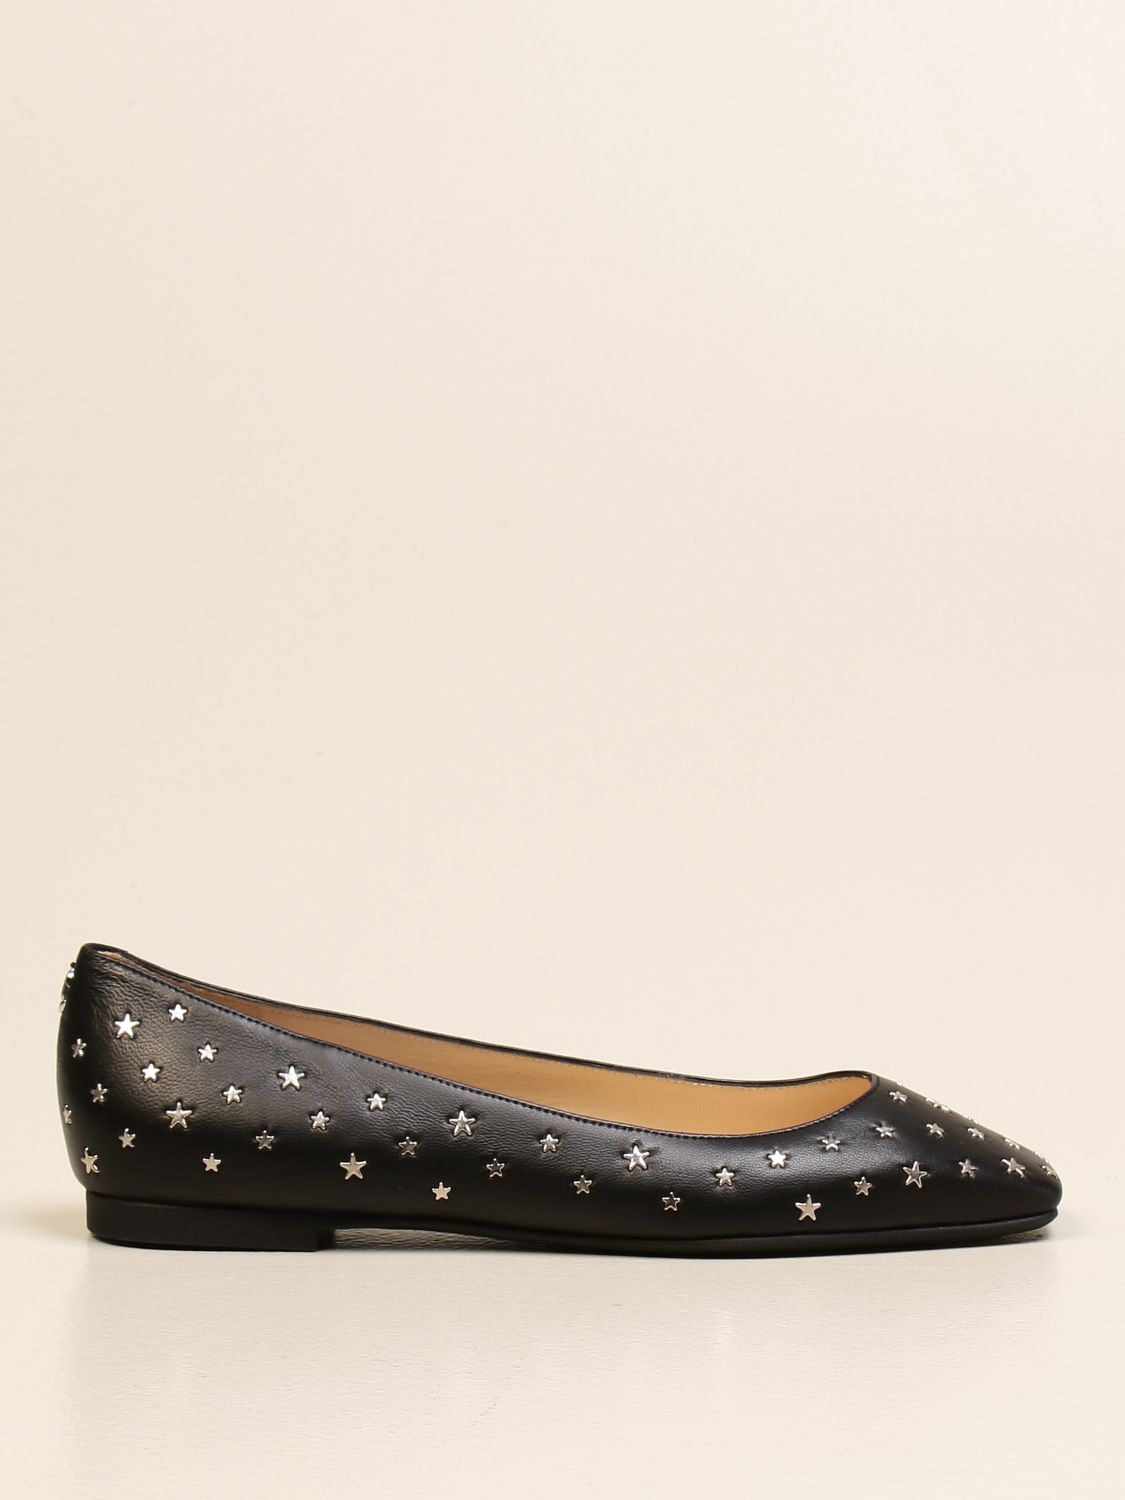 Jimmy Choo ballerina in leather with stars